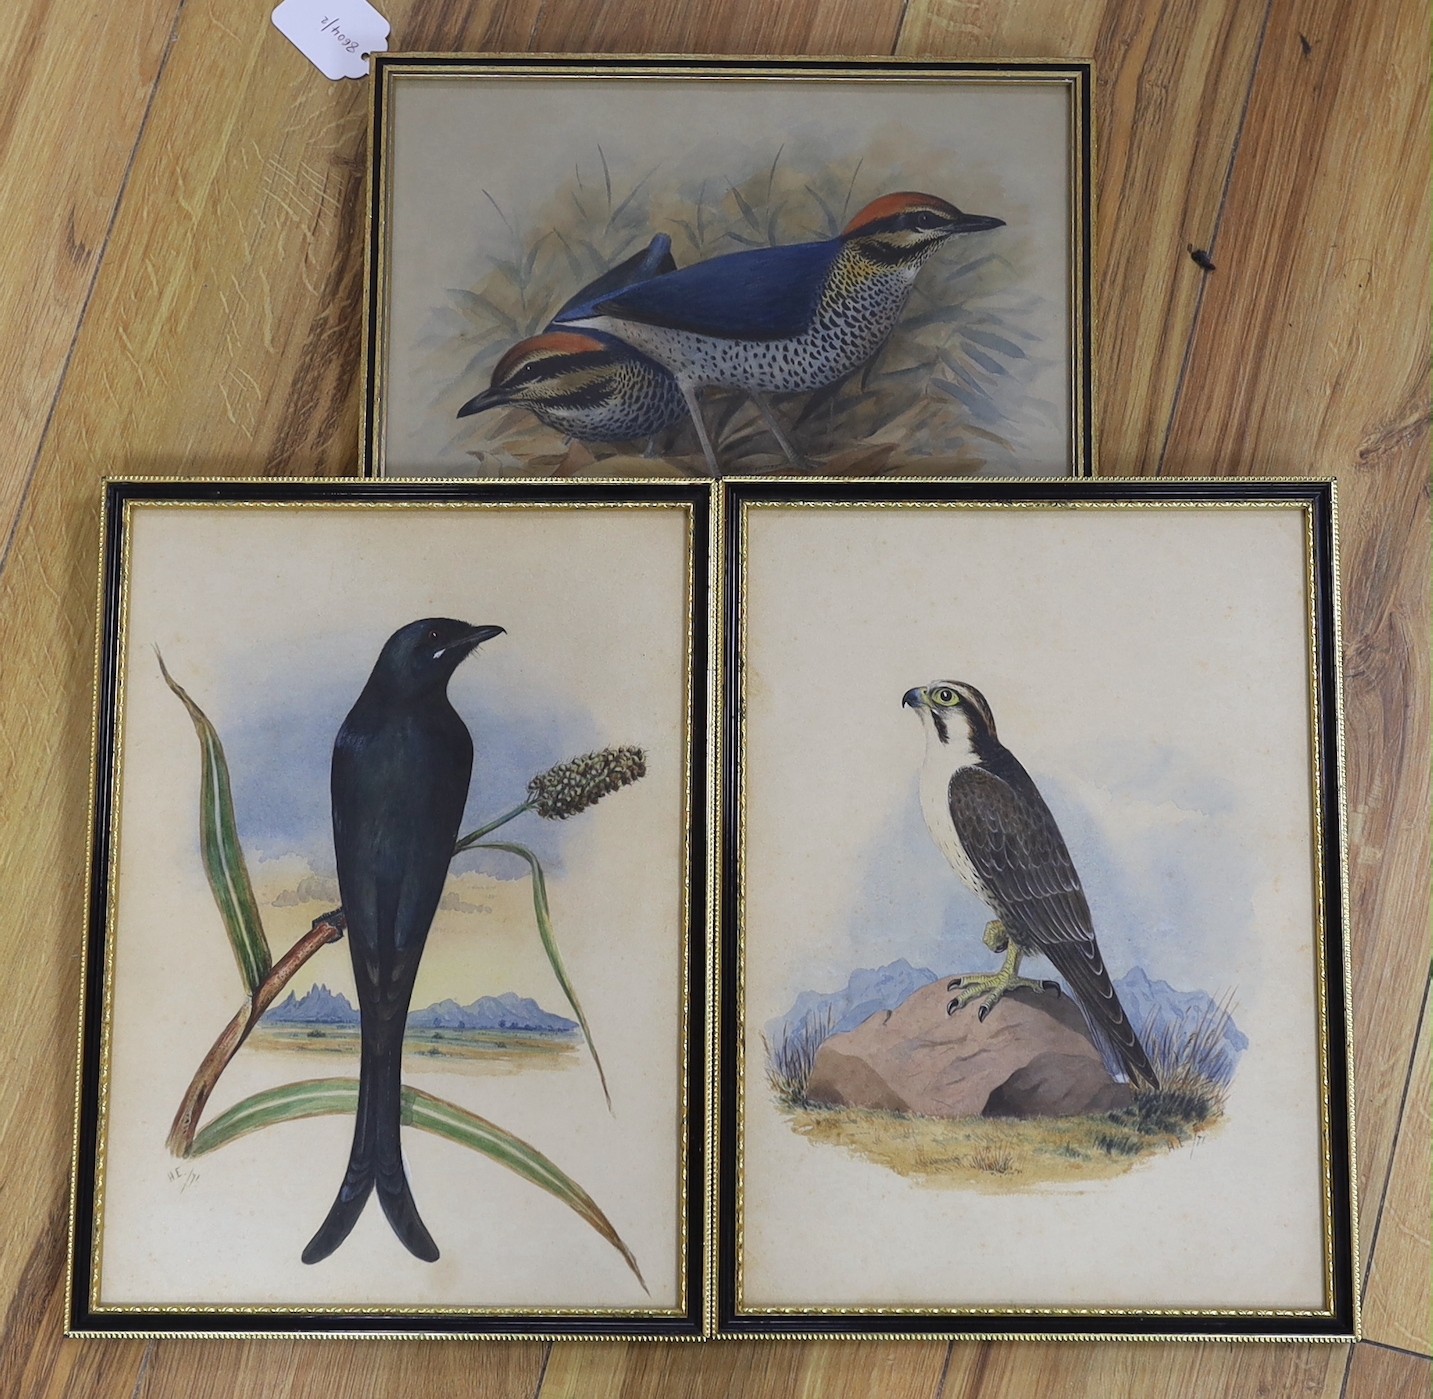 Henry Strachan Elton (1841-1934), three watercolours, 'Ground Thrush', 'Peregrine Falcon' and 'Drongo Schrike', signed and dated (18)71, 33 x 23cm and 21 x 30cm